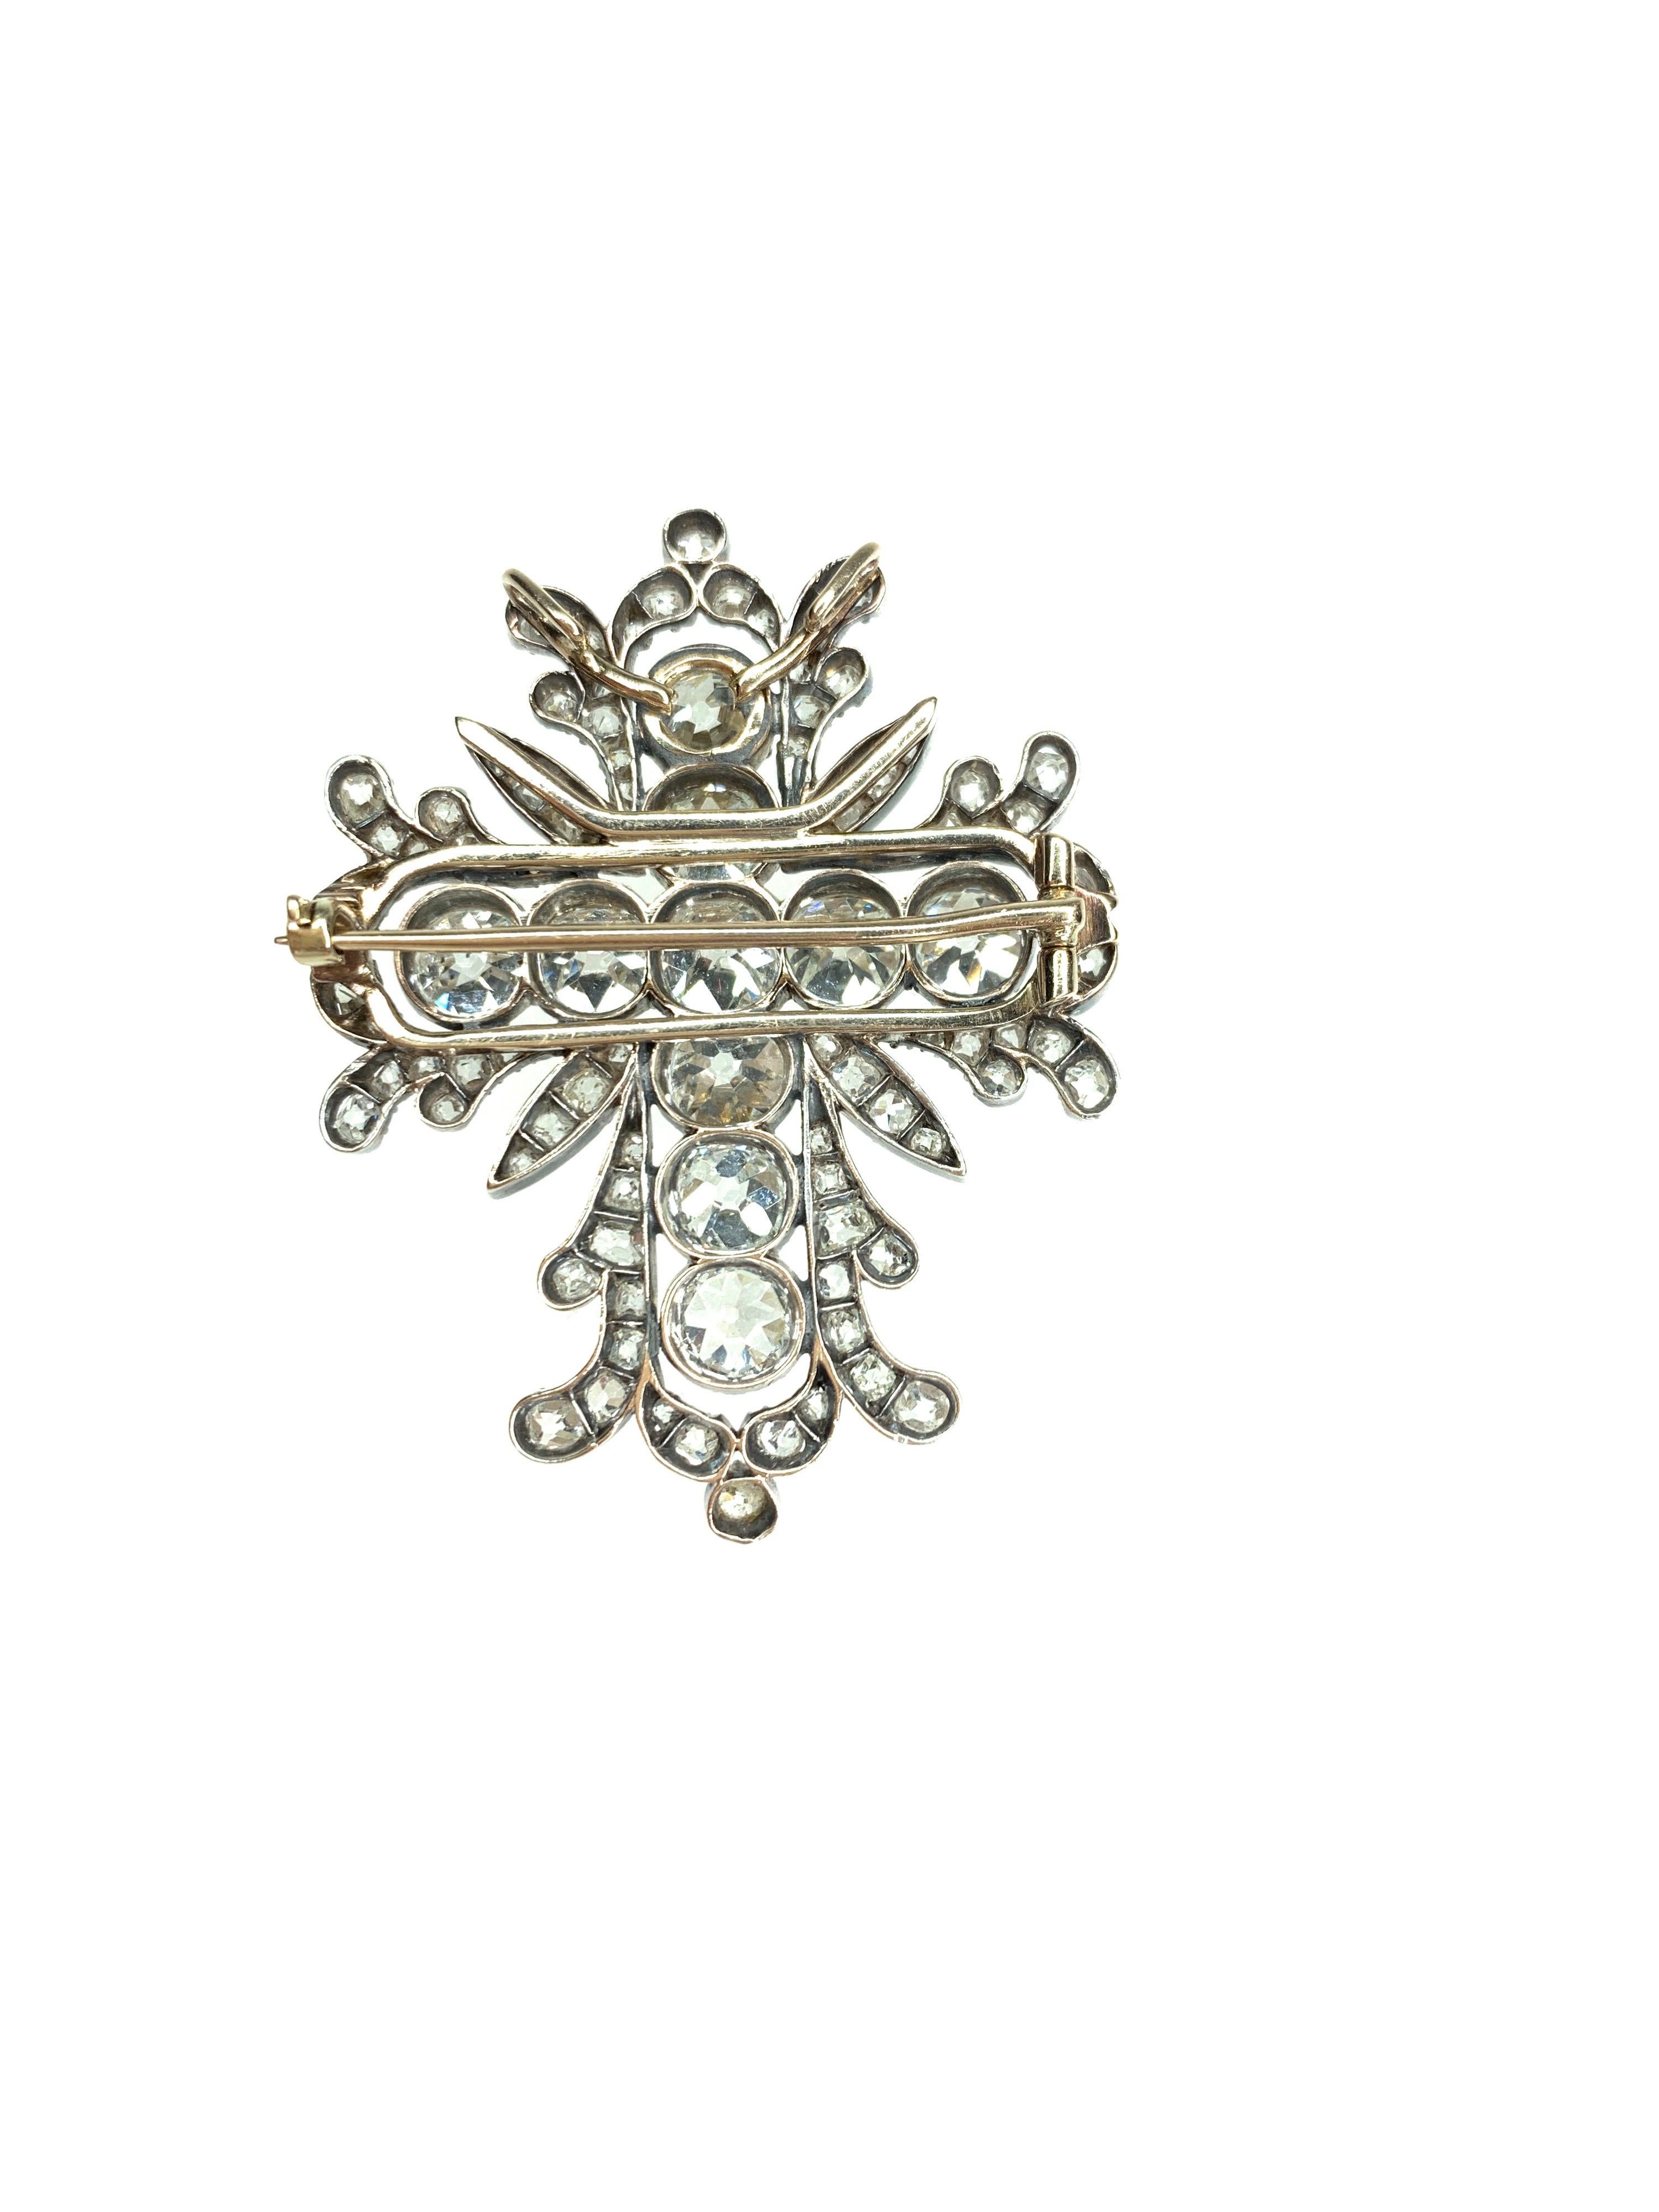 Gemolithos, Victorian, early 19th century diamond Cross brooch-pendant, silver and gold, est. Diamonds 7.5ct  I-K/VS-SI. extremely light and fine quality. Measures 46x35mm weight: 12.07gr. 